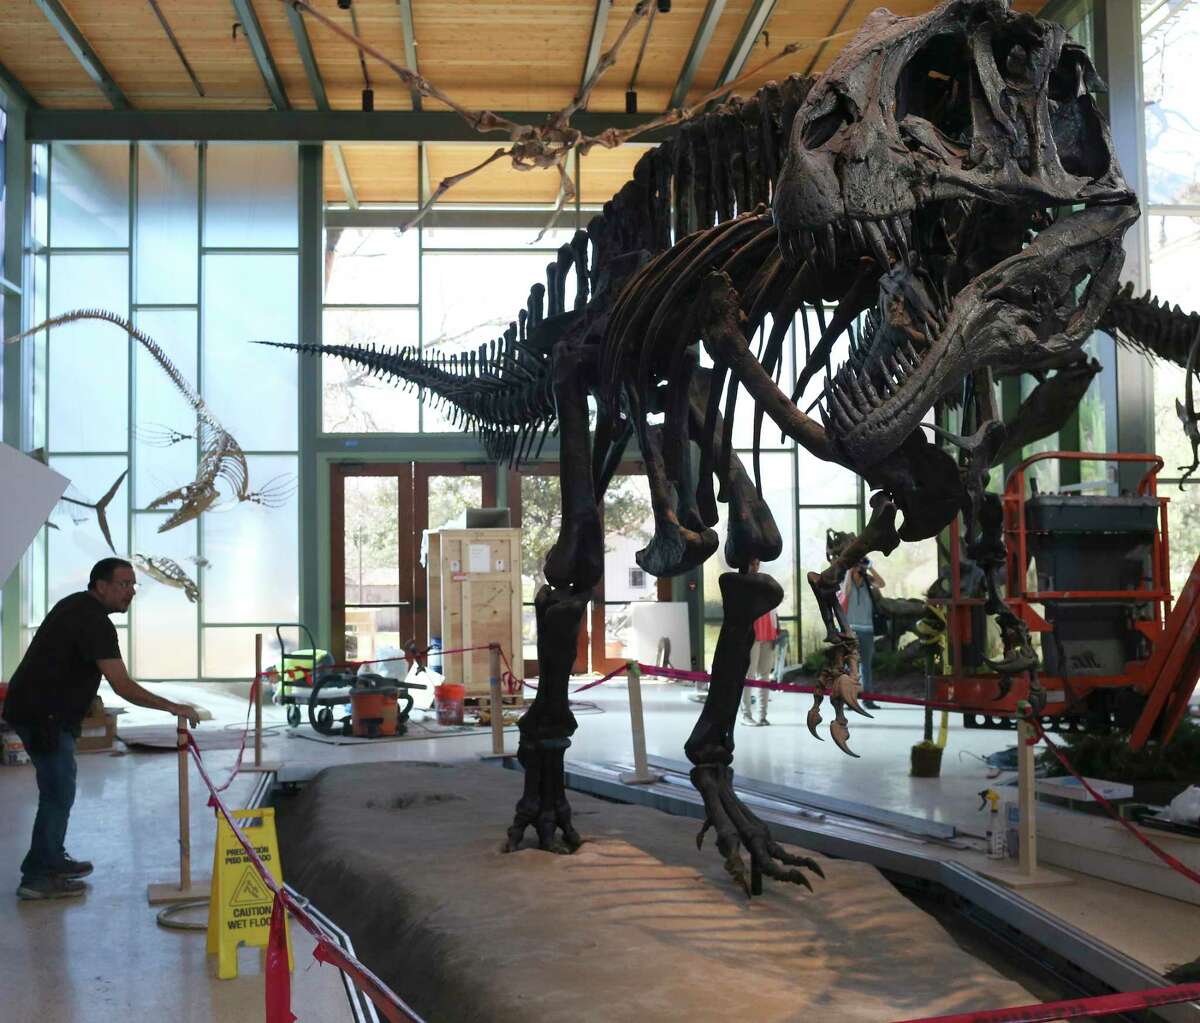 Workers remove tape from around the Acrocanthosaurus exhibit at the Witte Museum in 2017. Footprints of the dinosaur were found in Government Canyon State Natural Area.